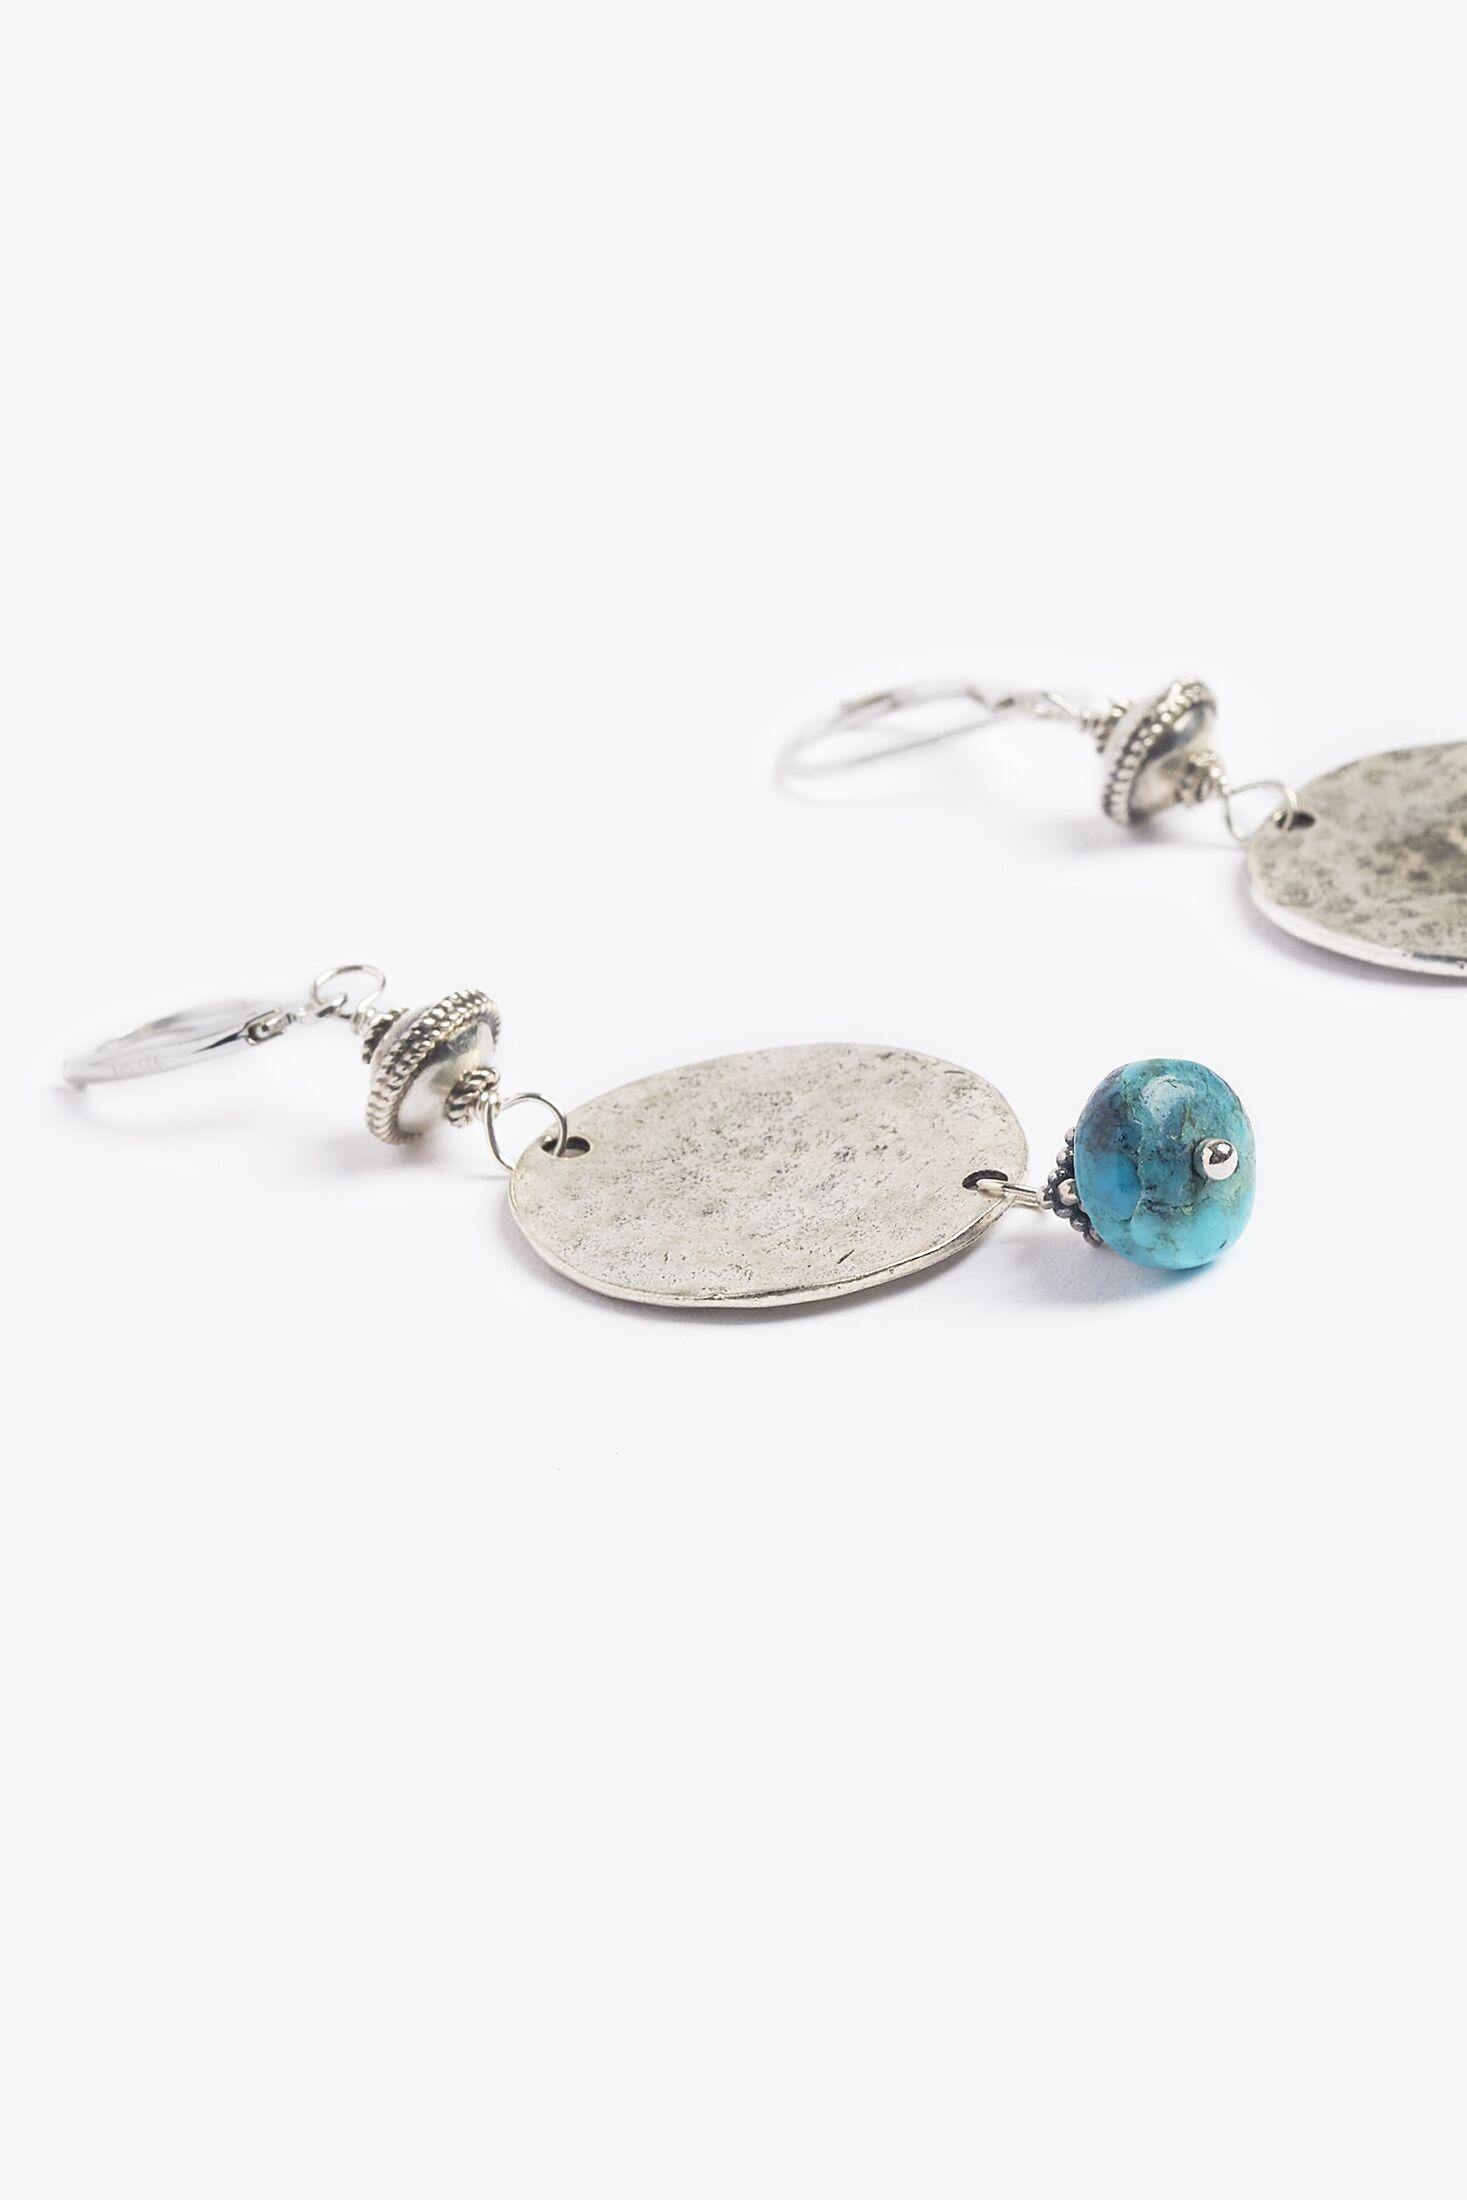 This piece is inspired by the beautiful beaches in Canguu, Bali and comprised of vibrant copper turquoise.  The earrings compliment the Pantai necklace and bracelet set.
Turquoise is a calming and refreshing stone.  It is known to bring serenity yet